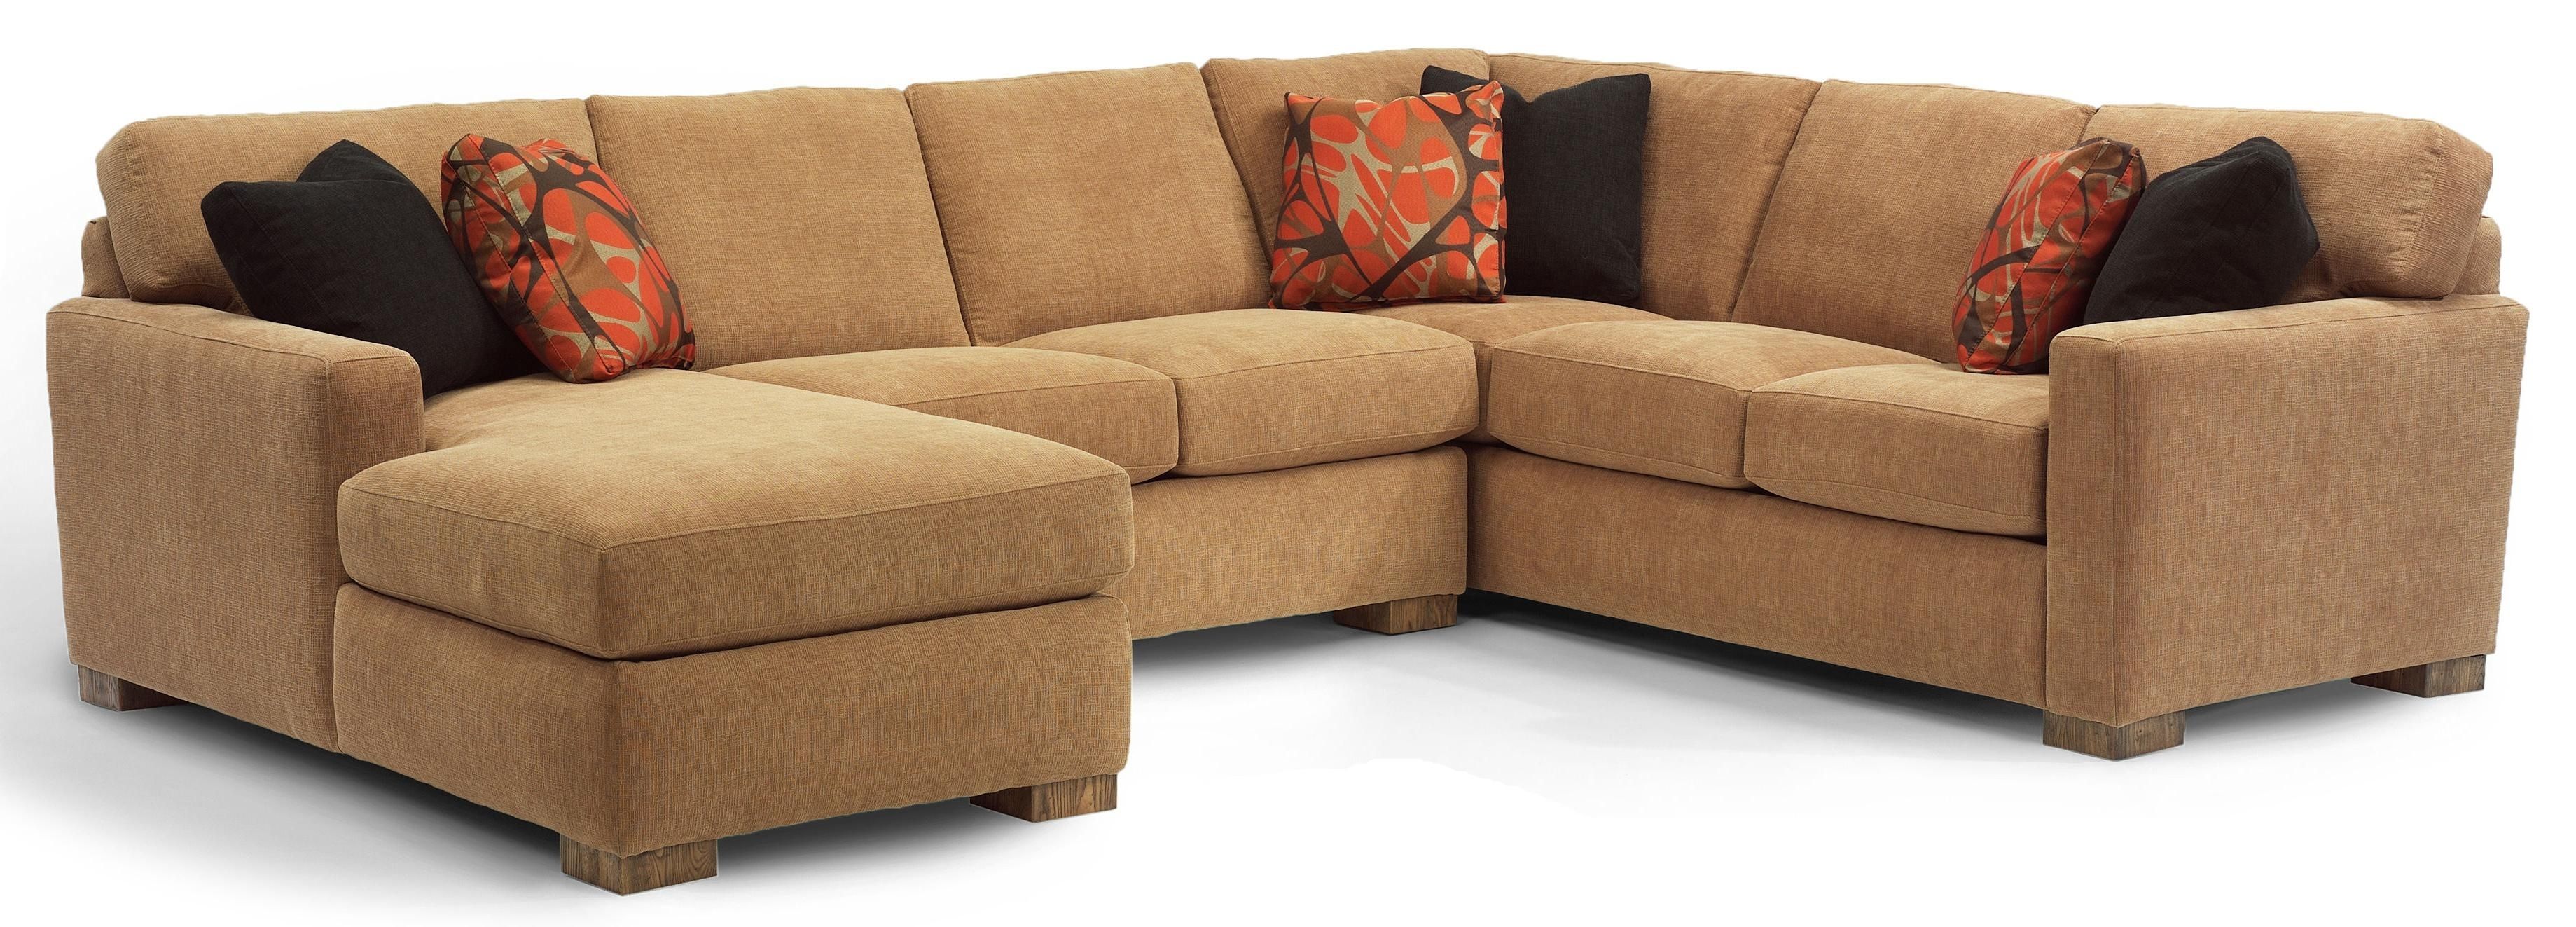 Flexsteel Bryant Contemporary 3 Pc. Sectional Sofa With Laf Chaise Regarding Hattiesburg Ms Sectional Sofas (Photo 5 of 10)